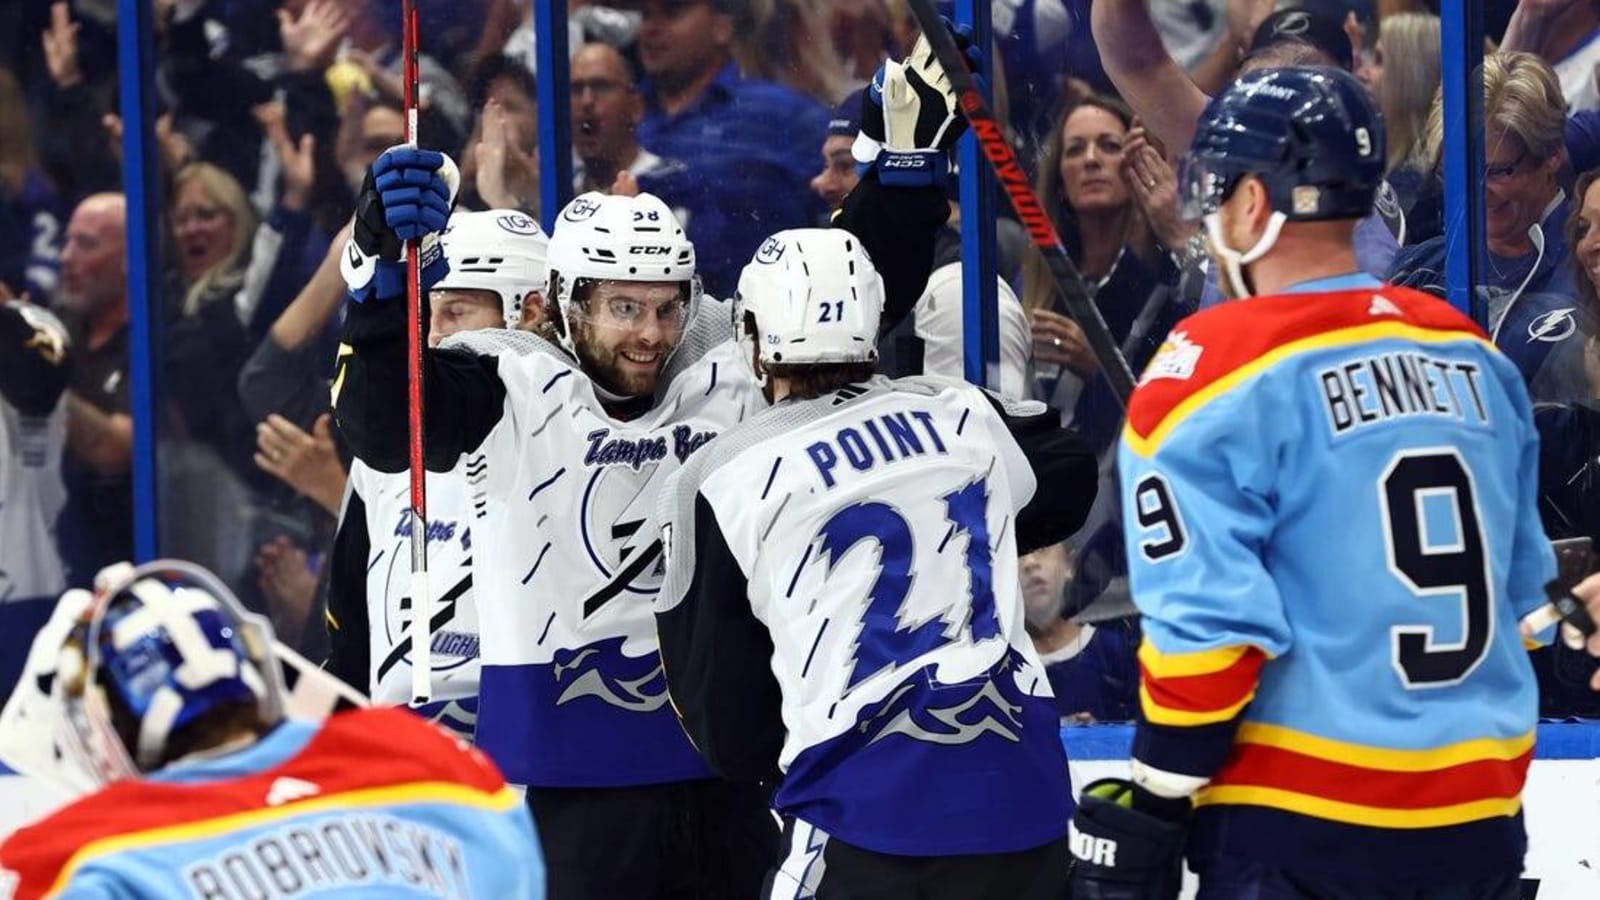 Tampa Bay Lightning vs. Florida Panthers preview, prediction, pick for 2/6: Panthers prepare for playoff push